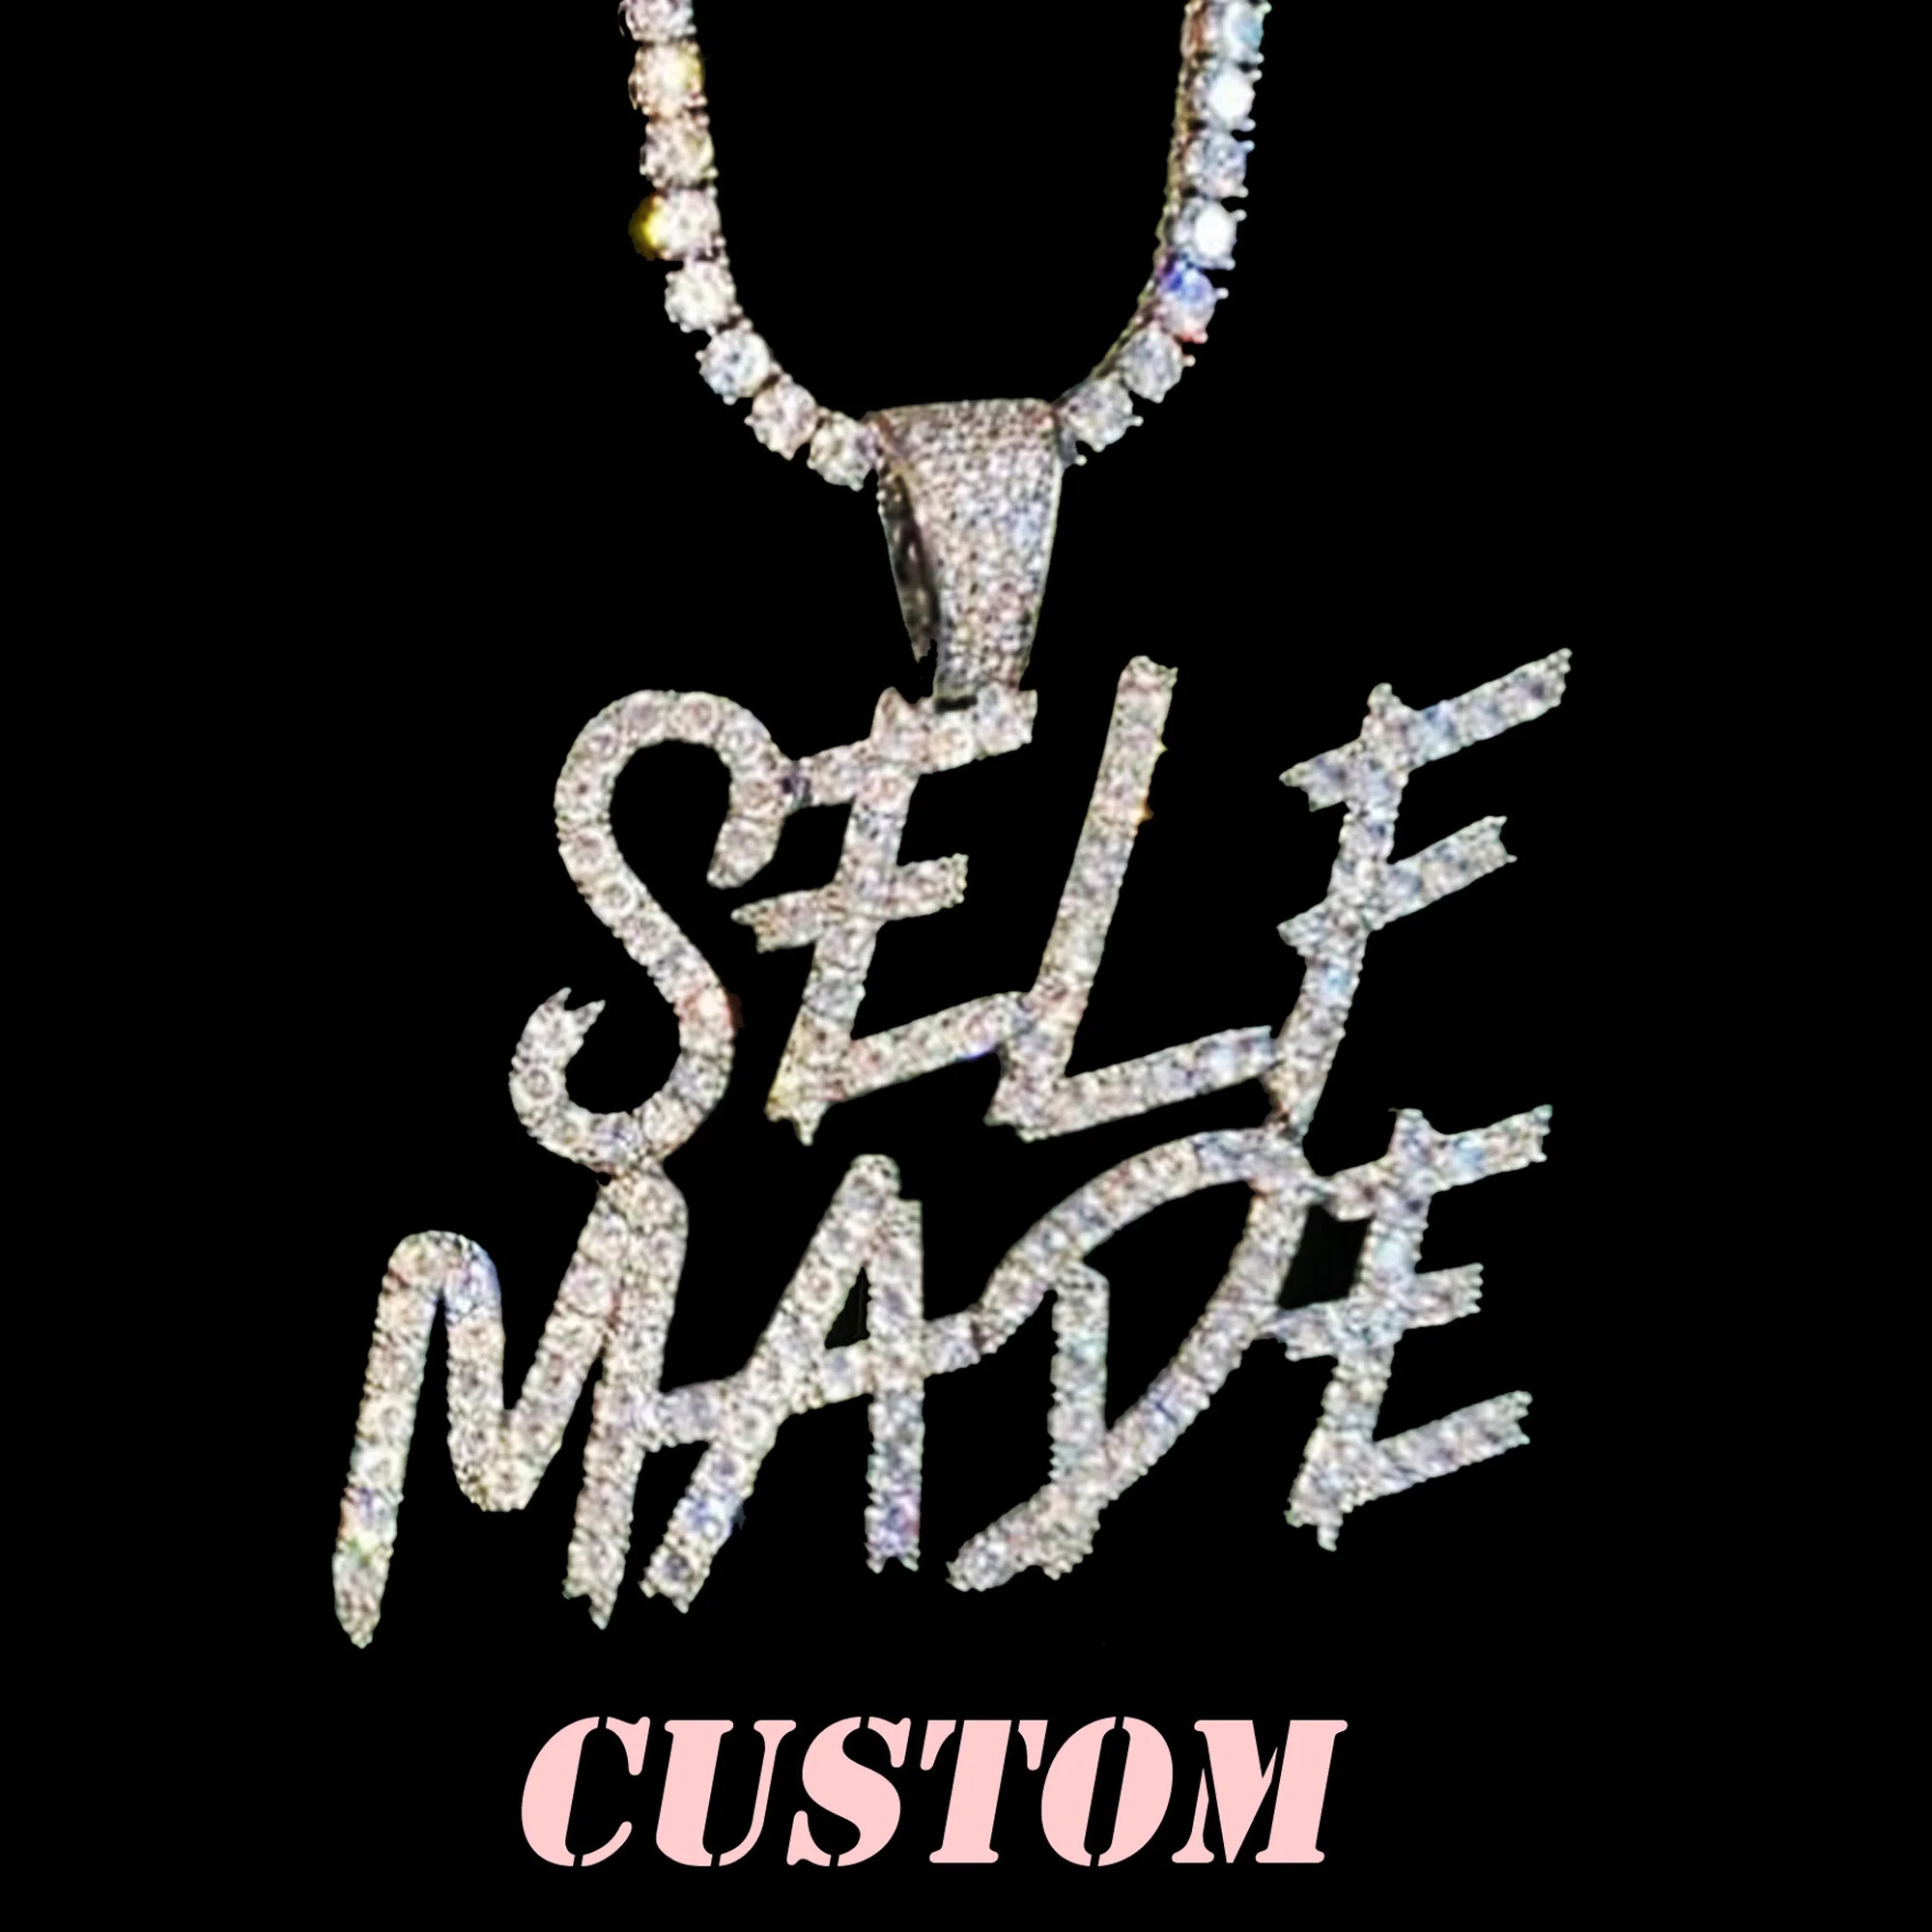 custom-name-necklace-large-size-of-brush-font-initial-necklace-icy-bling-personalized-letters-pendant-nameplate-chain